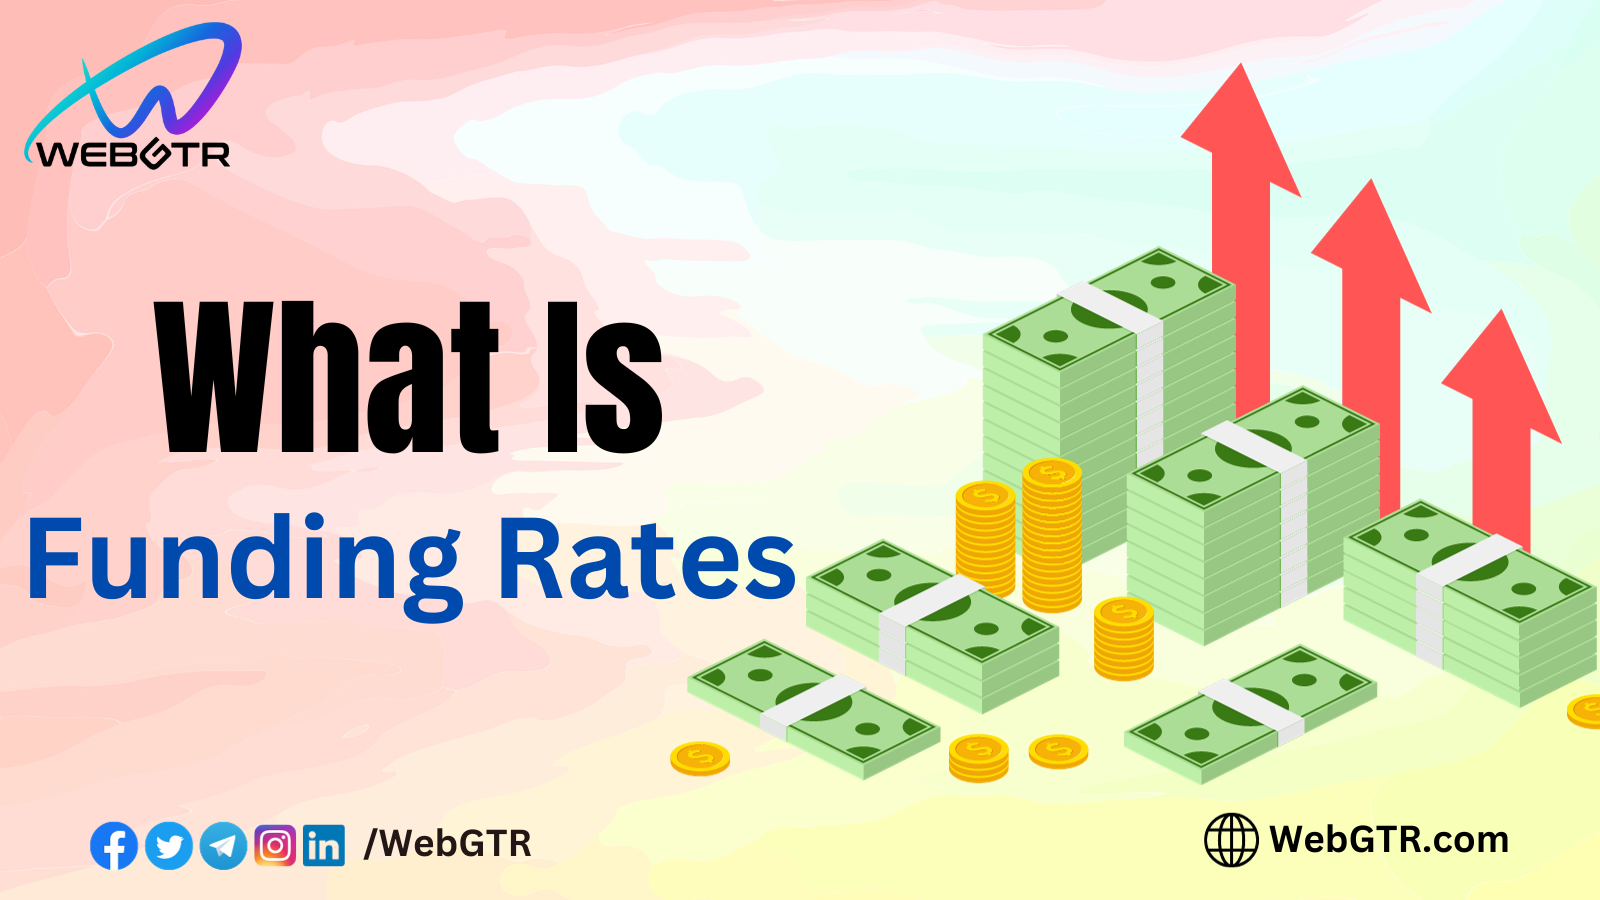 What Is Funding Rates?